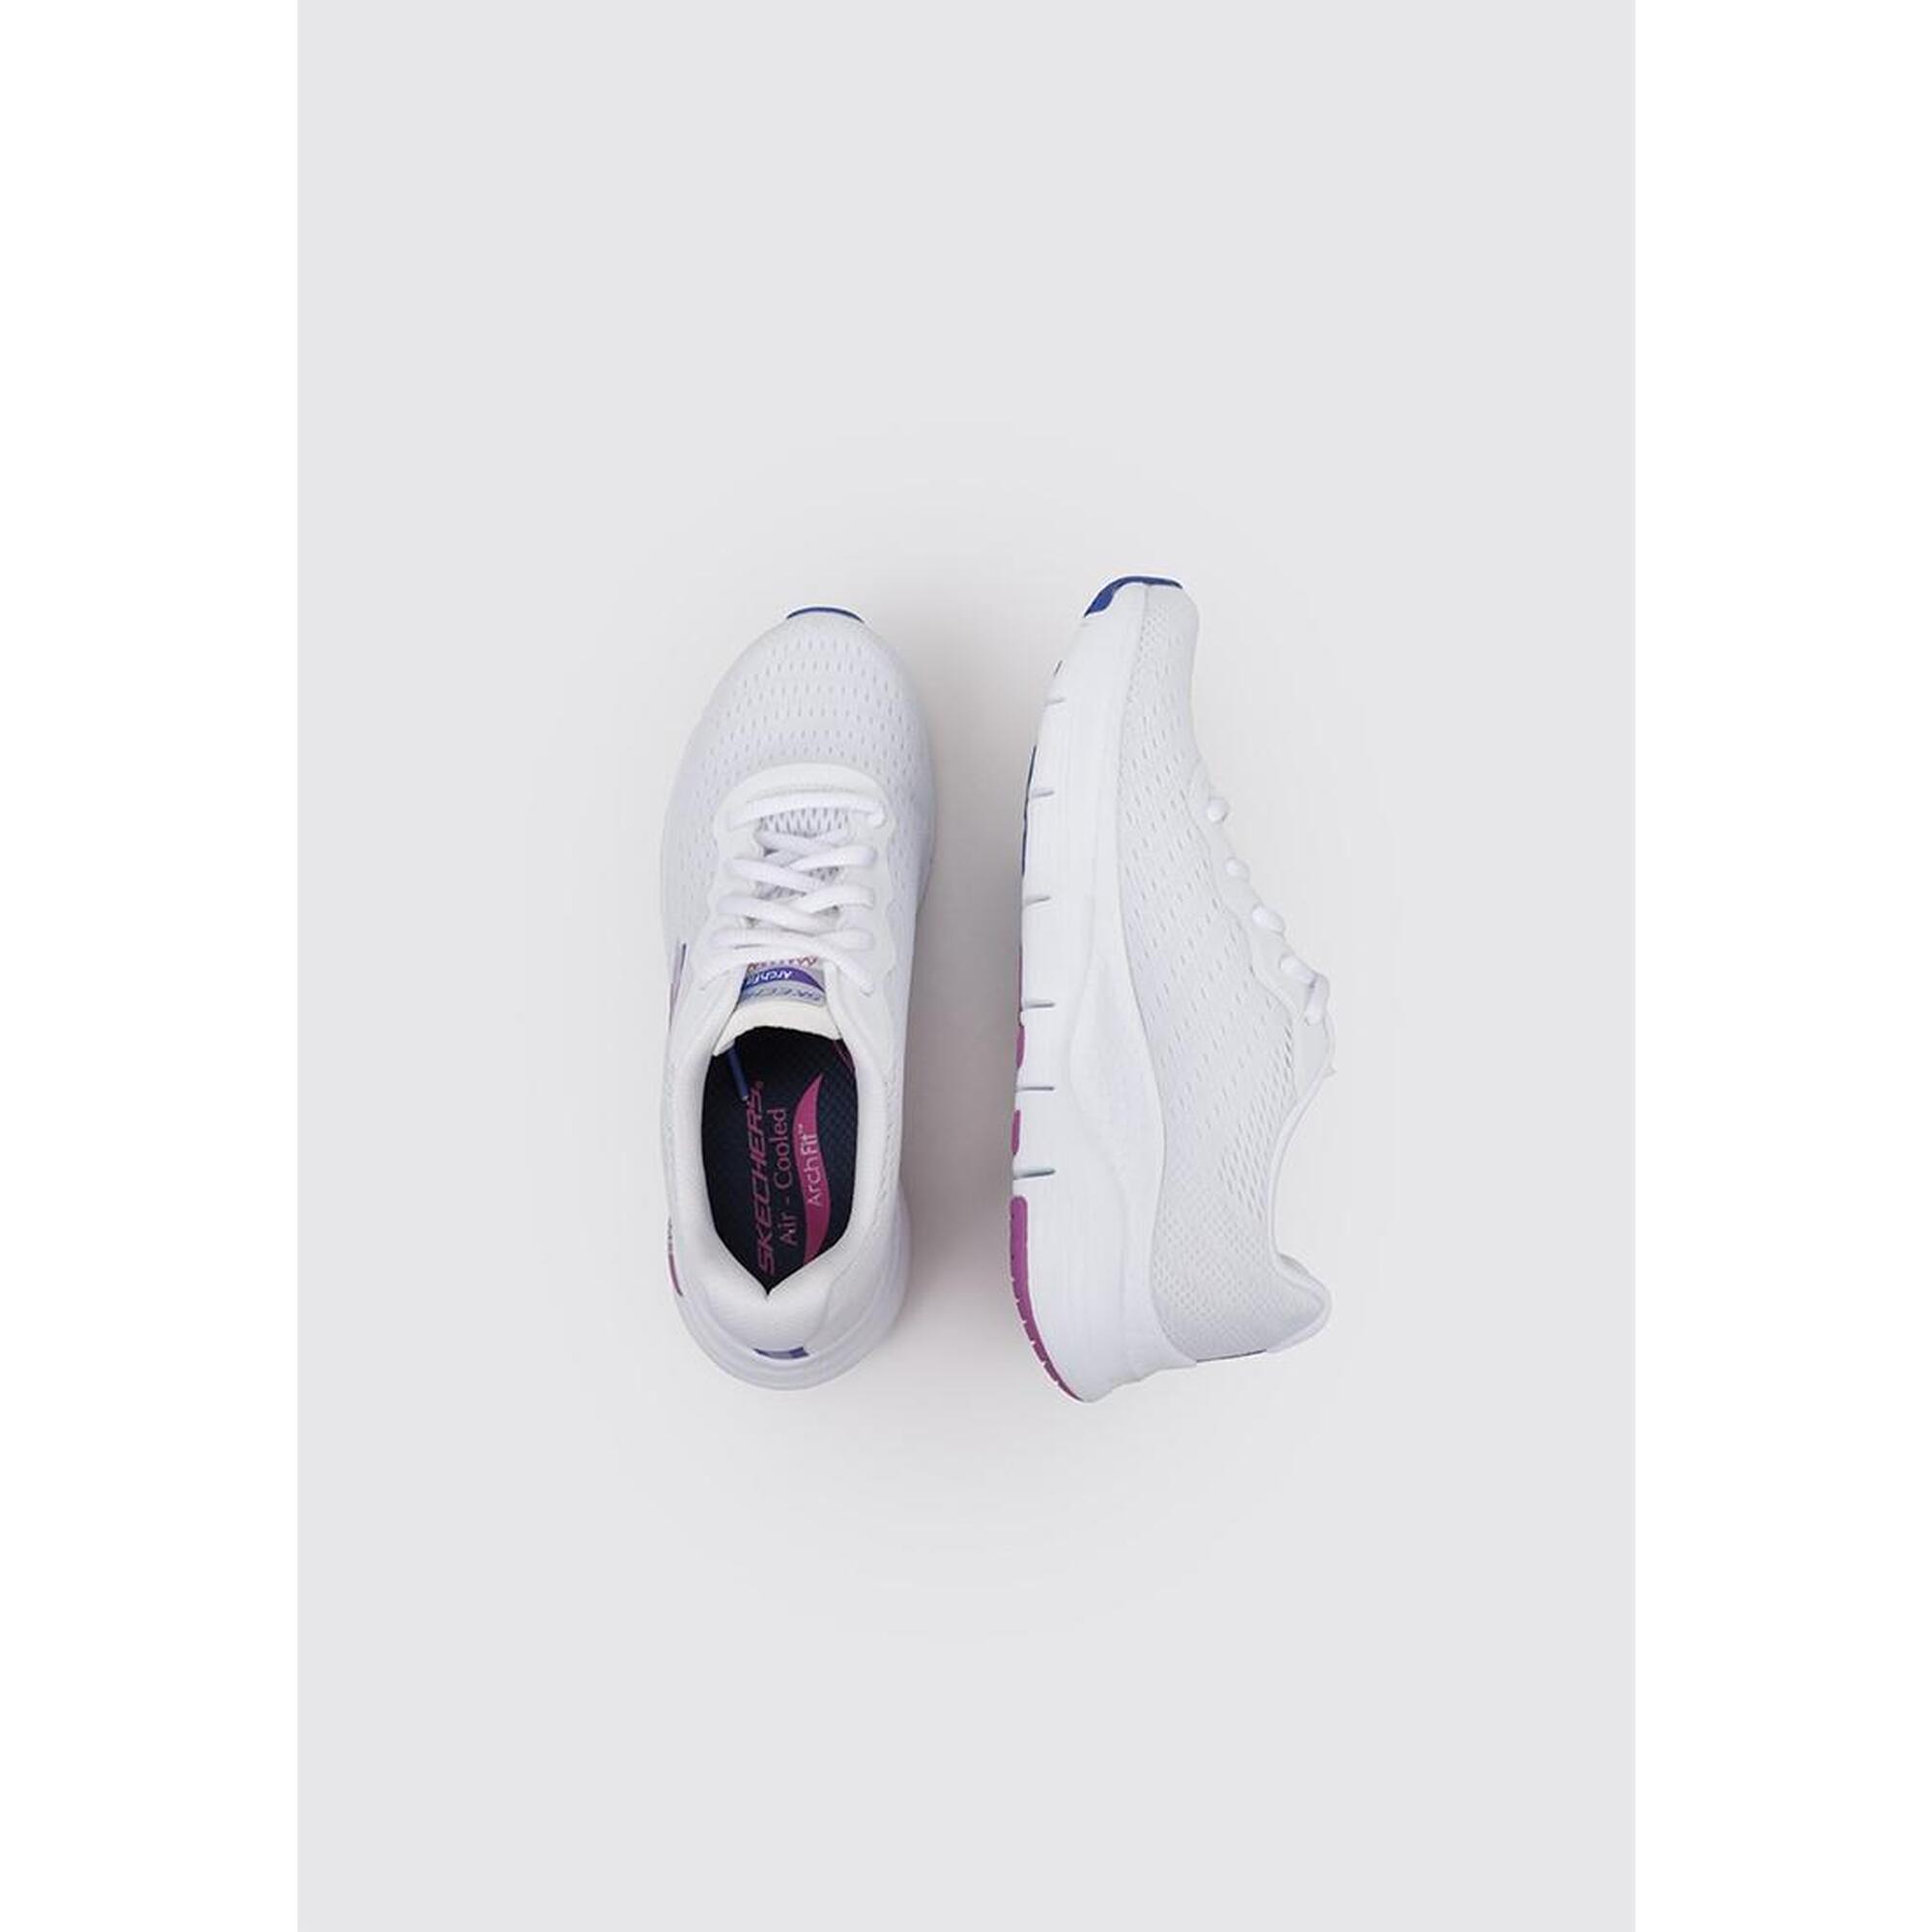 Sneakers pour femmes Arch Fit-Infinity Cool